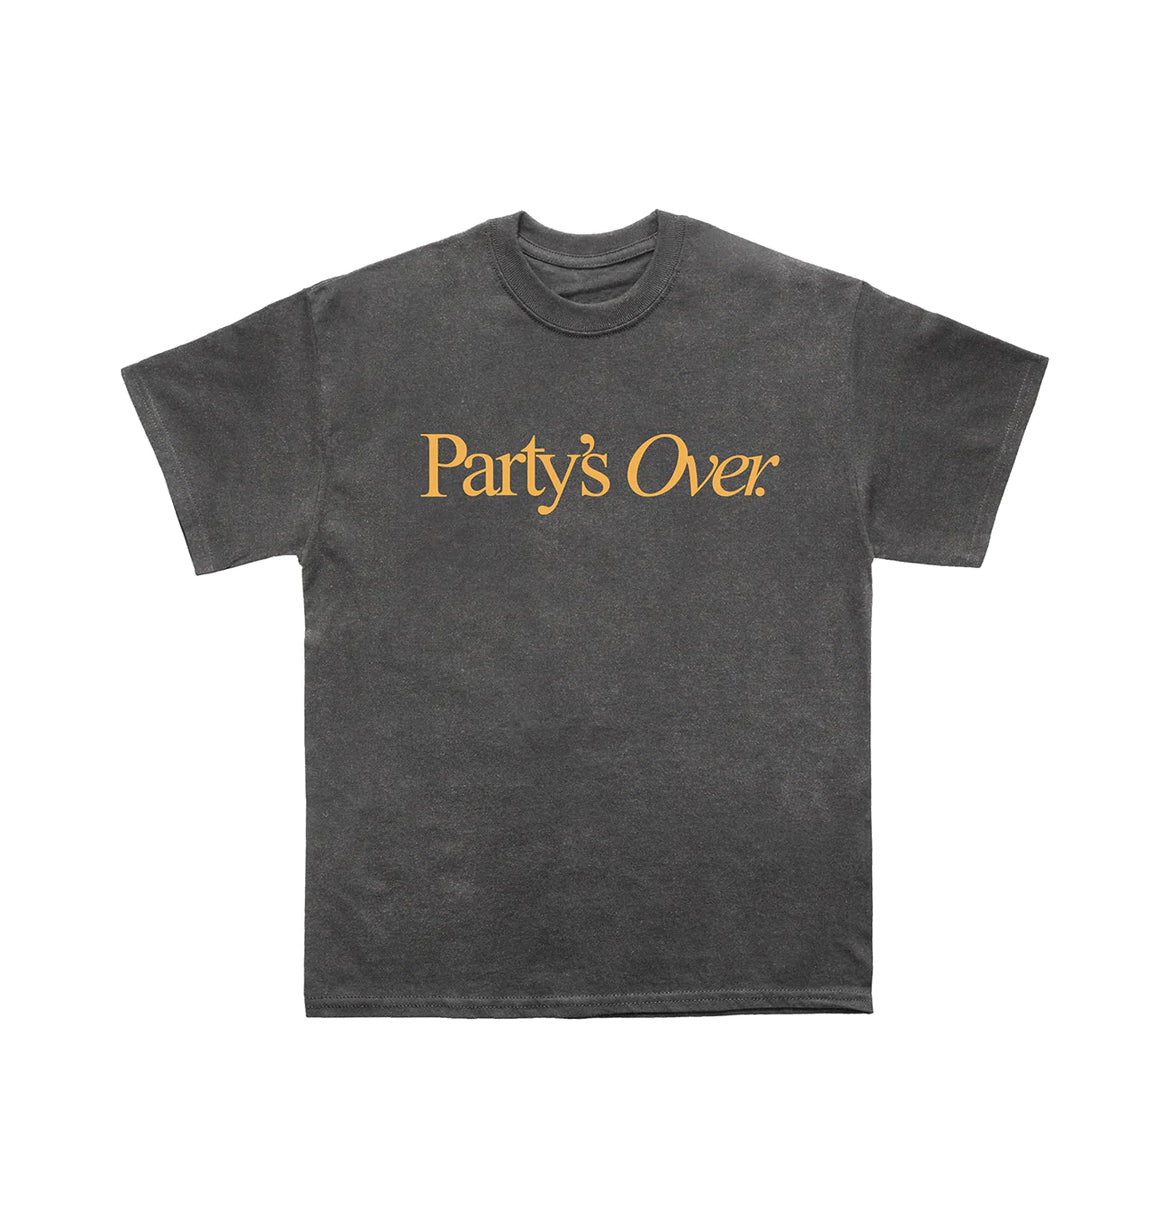 Lifted Anchors Party’s Over tee